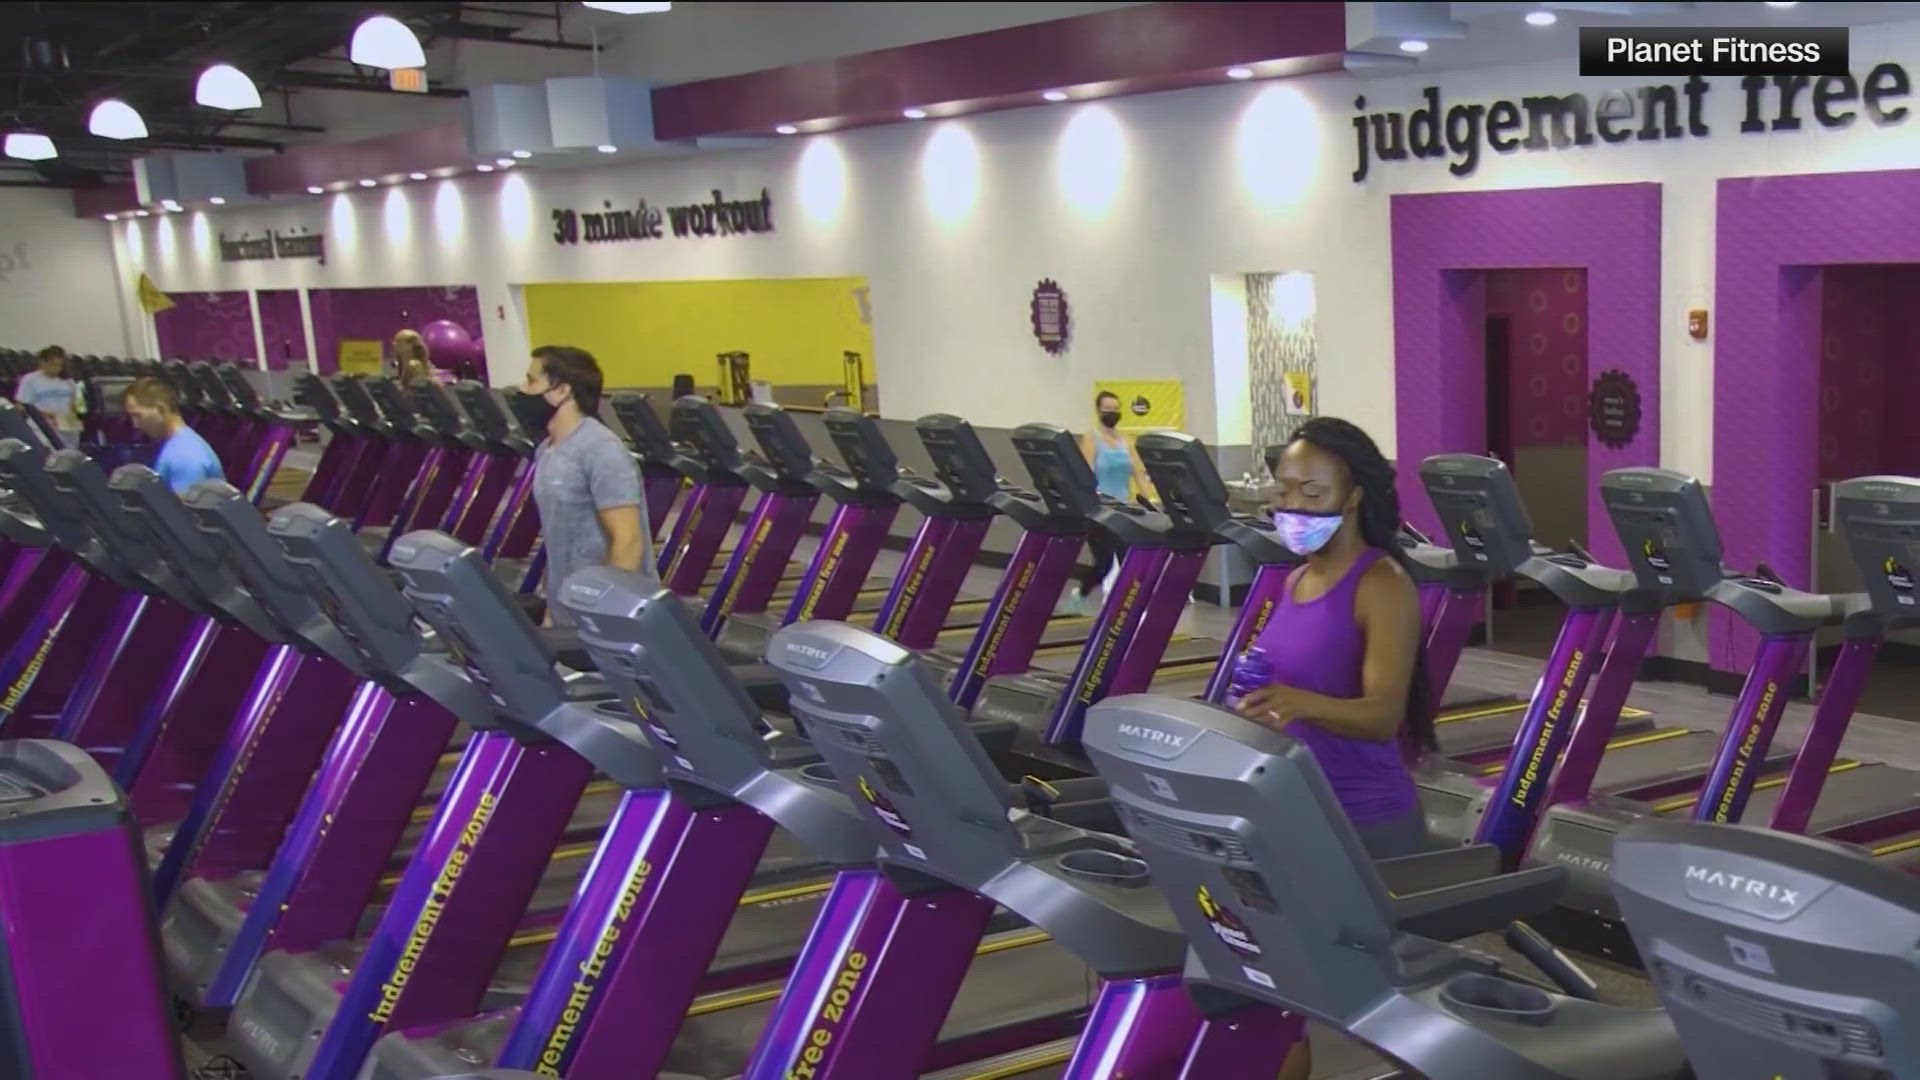 Planet Fitness says the decision to raise the cost of its basic plan comes amid "several headwinds" impacting the company's earnings results.